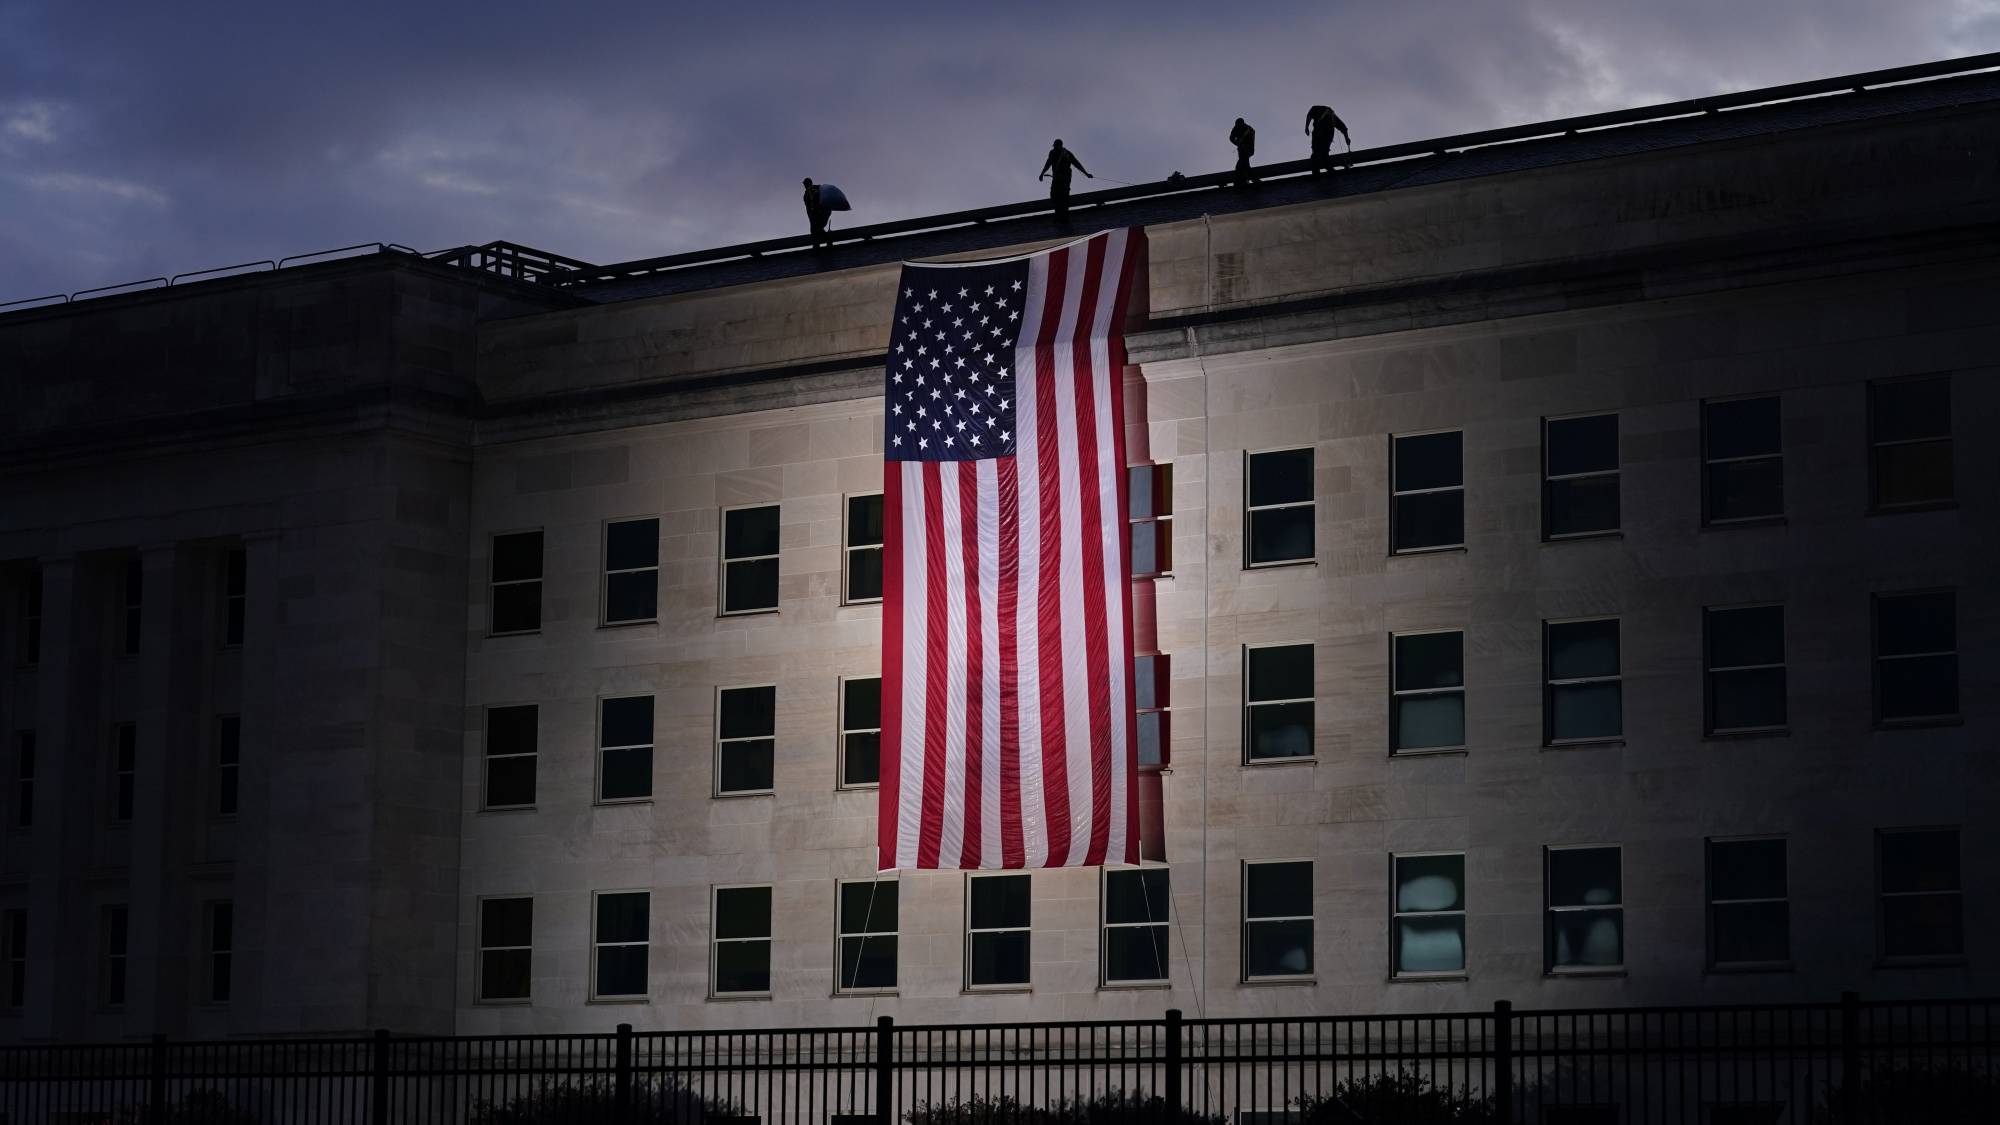 A large American flag is unfurled at the Pentagon ahead of ceremonies at the National 9/11 Pentagon Memorial to honor the 184 people killed in the 2001 terrorist attack on the Pentagon, in Washington, Friday Sept. 11, 2020. (AP Photo/J. Scott Applewhite)